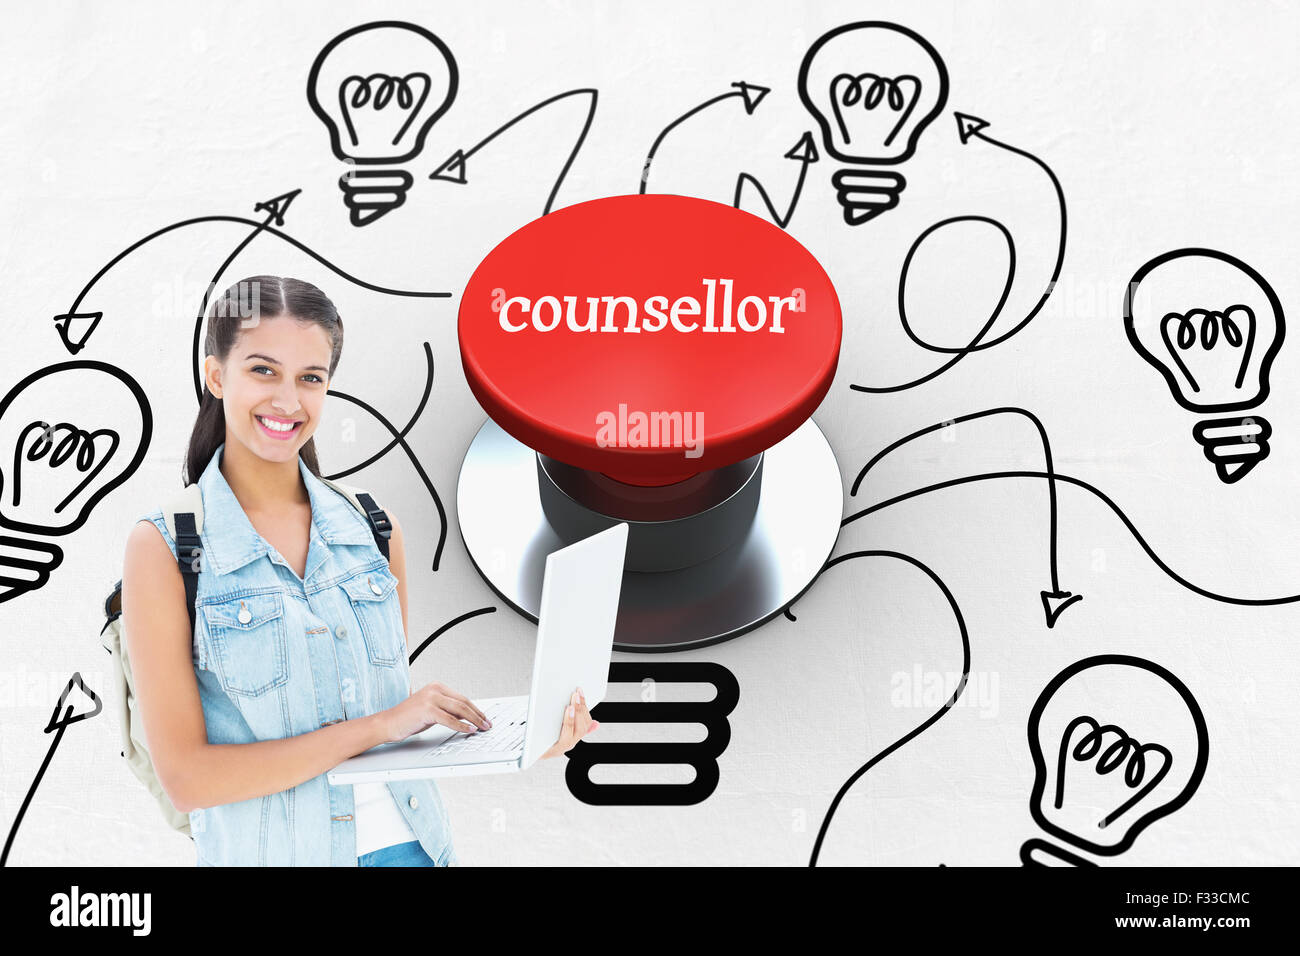 Counsellor against digitally generated red push button Stock Photo